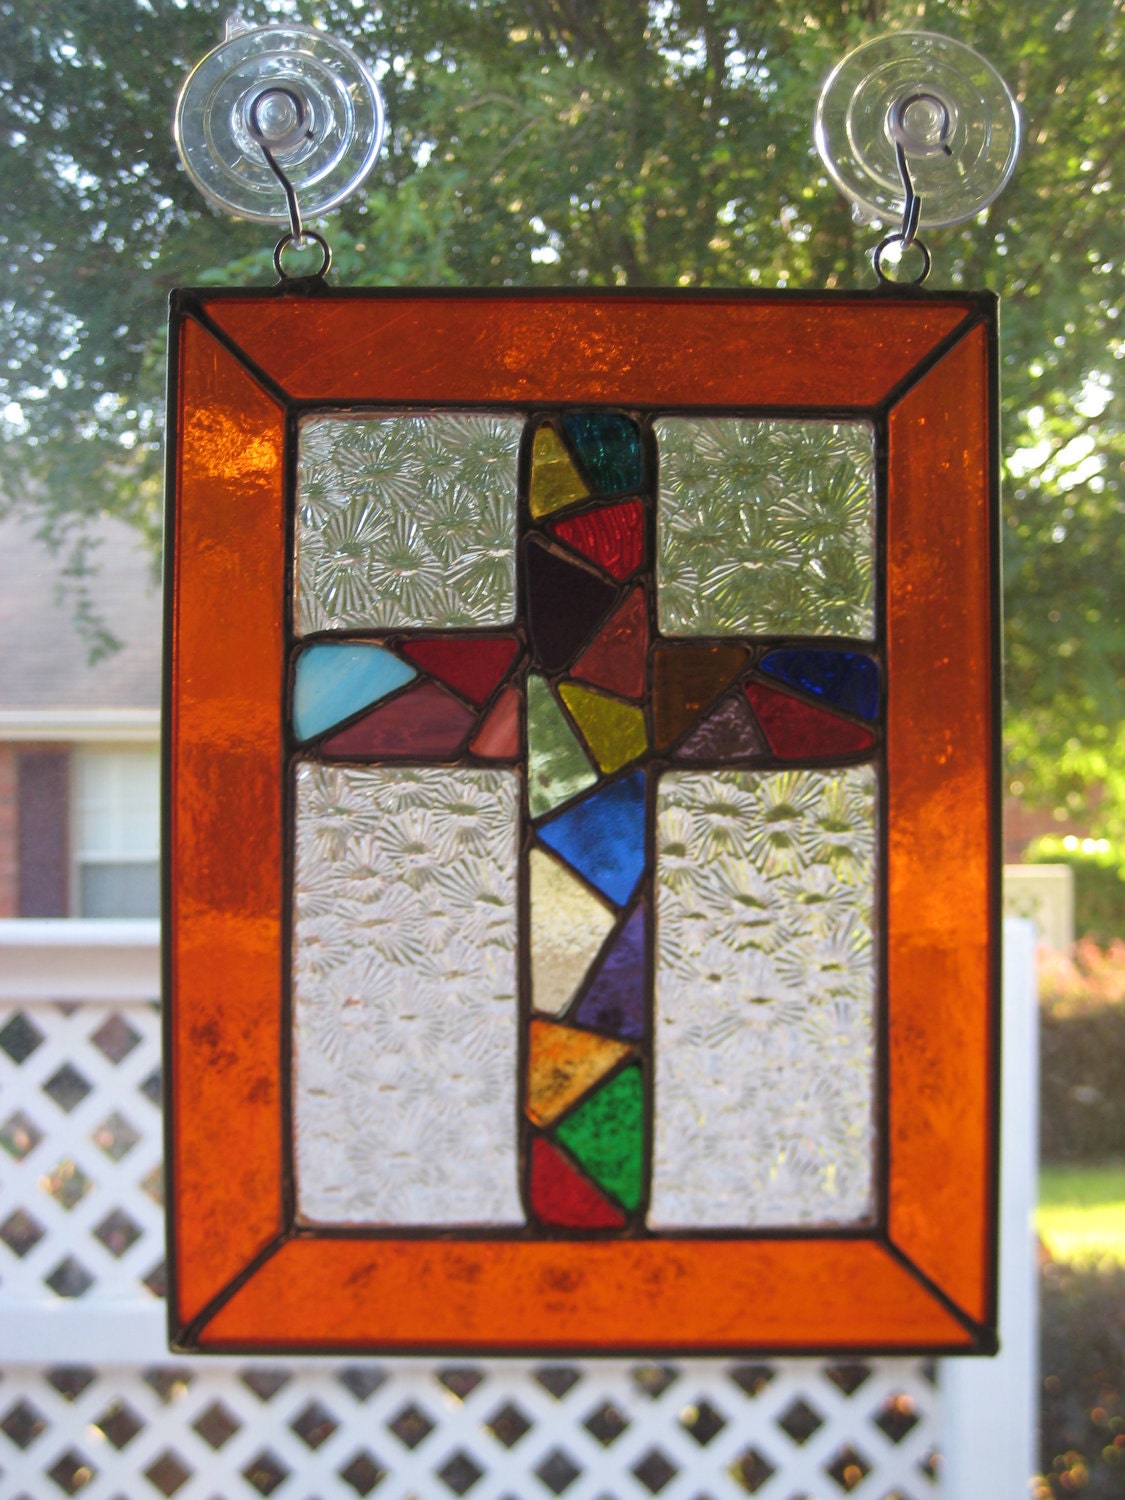 9"x7" Mosaic Cross Stained Glass Window Hanging